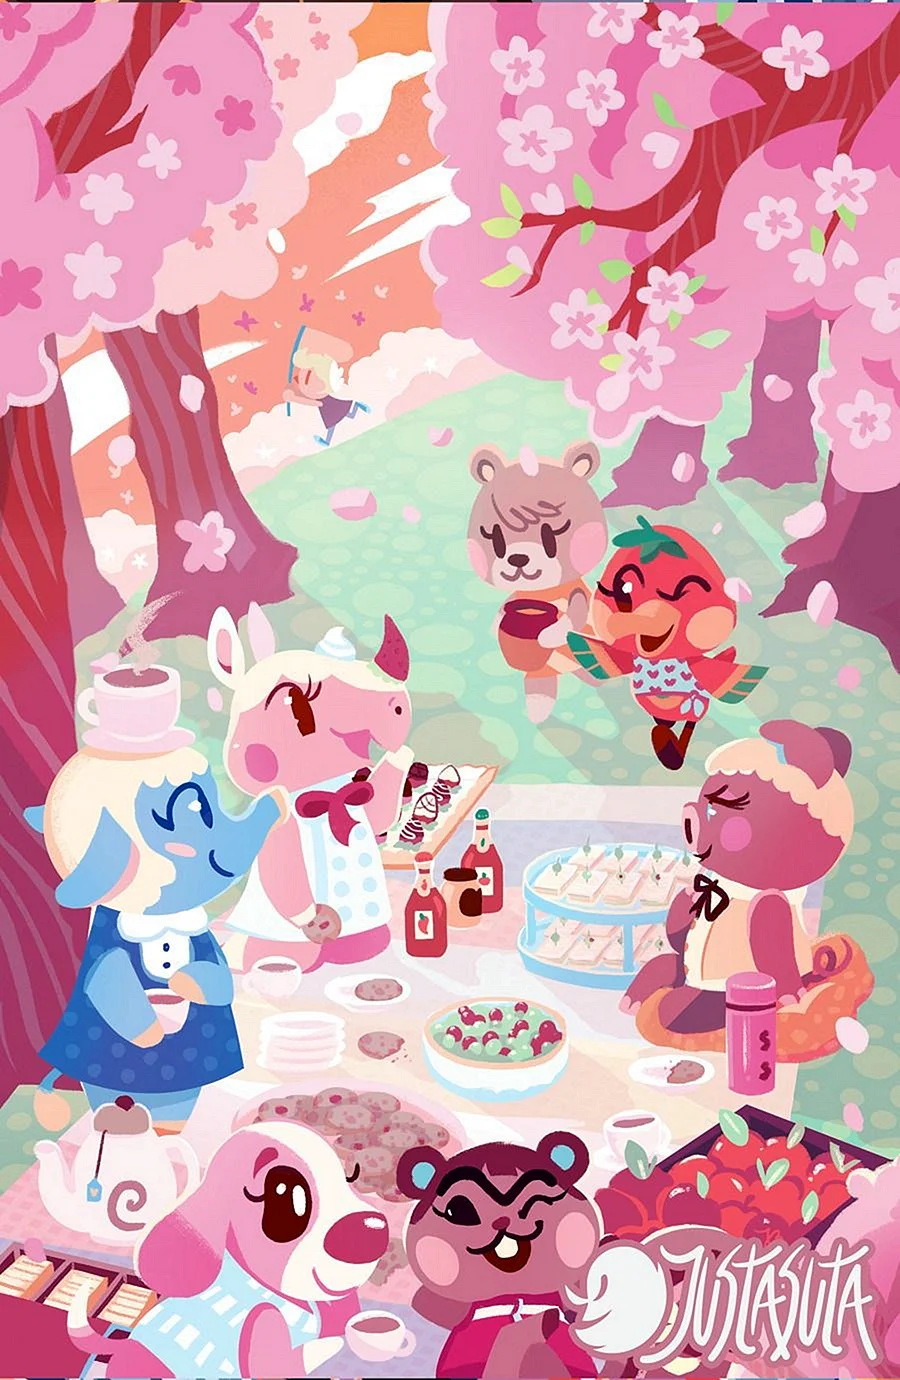 Animal Crossing Aesthetic Wallpaper For iPhone